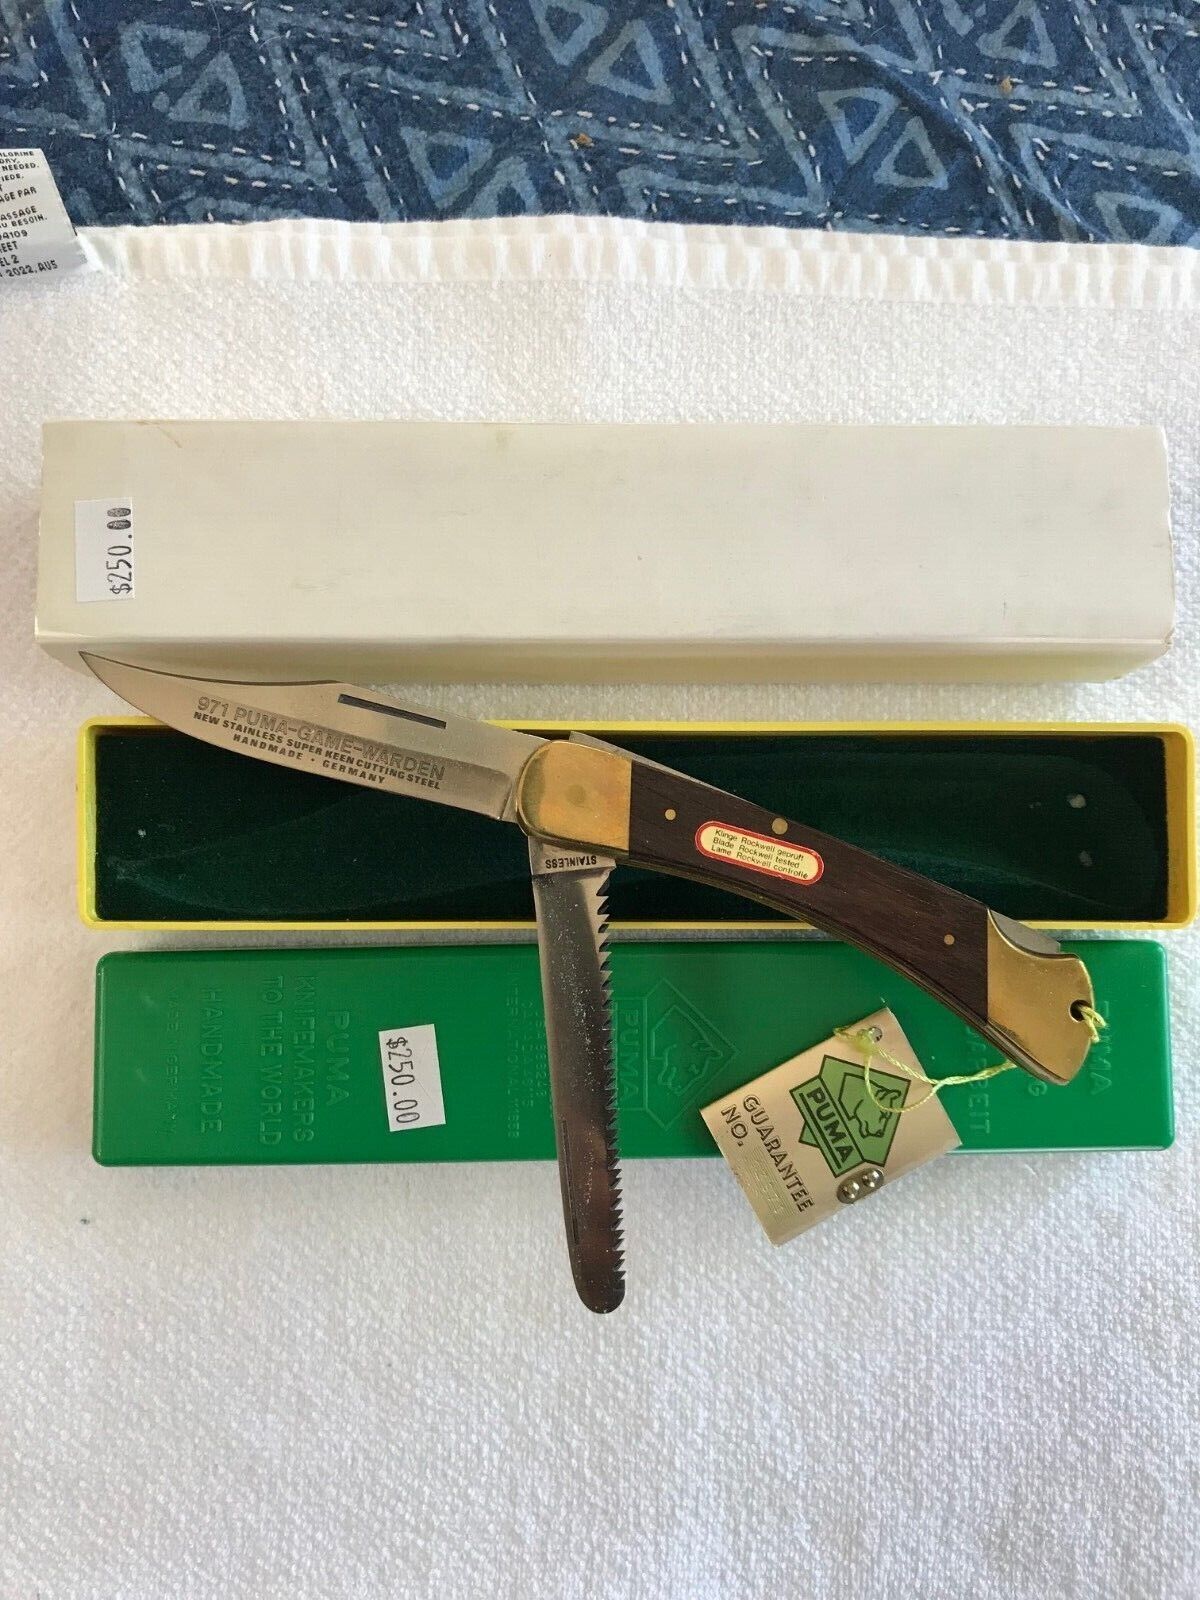 PUMA KNIFE # 971 GAME WARDEN with SAW BLADE NEW in BOX 1979 ALL ORIGINAL